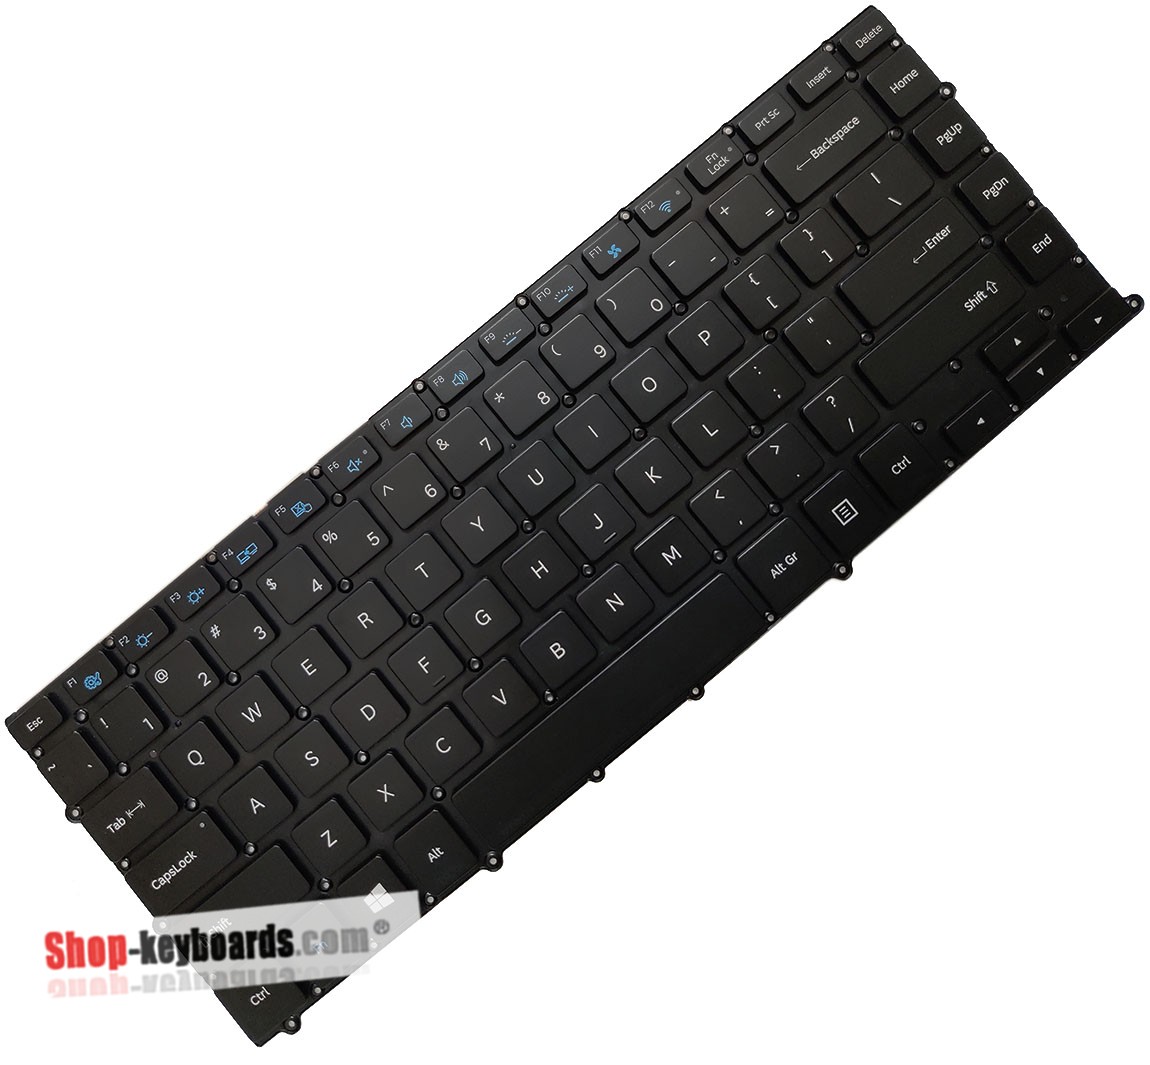 Samsung NT900X4C-K01CA  Keyboard replacement